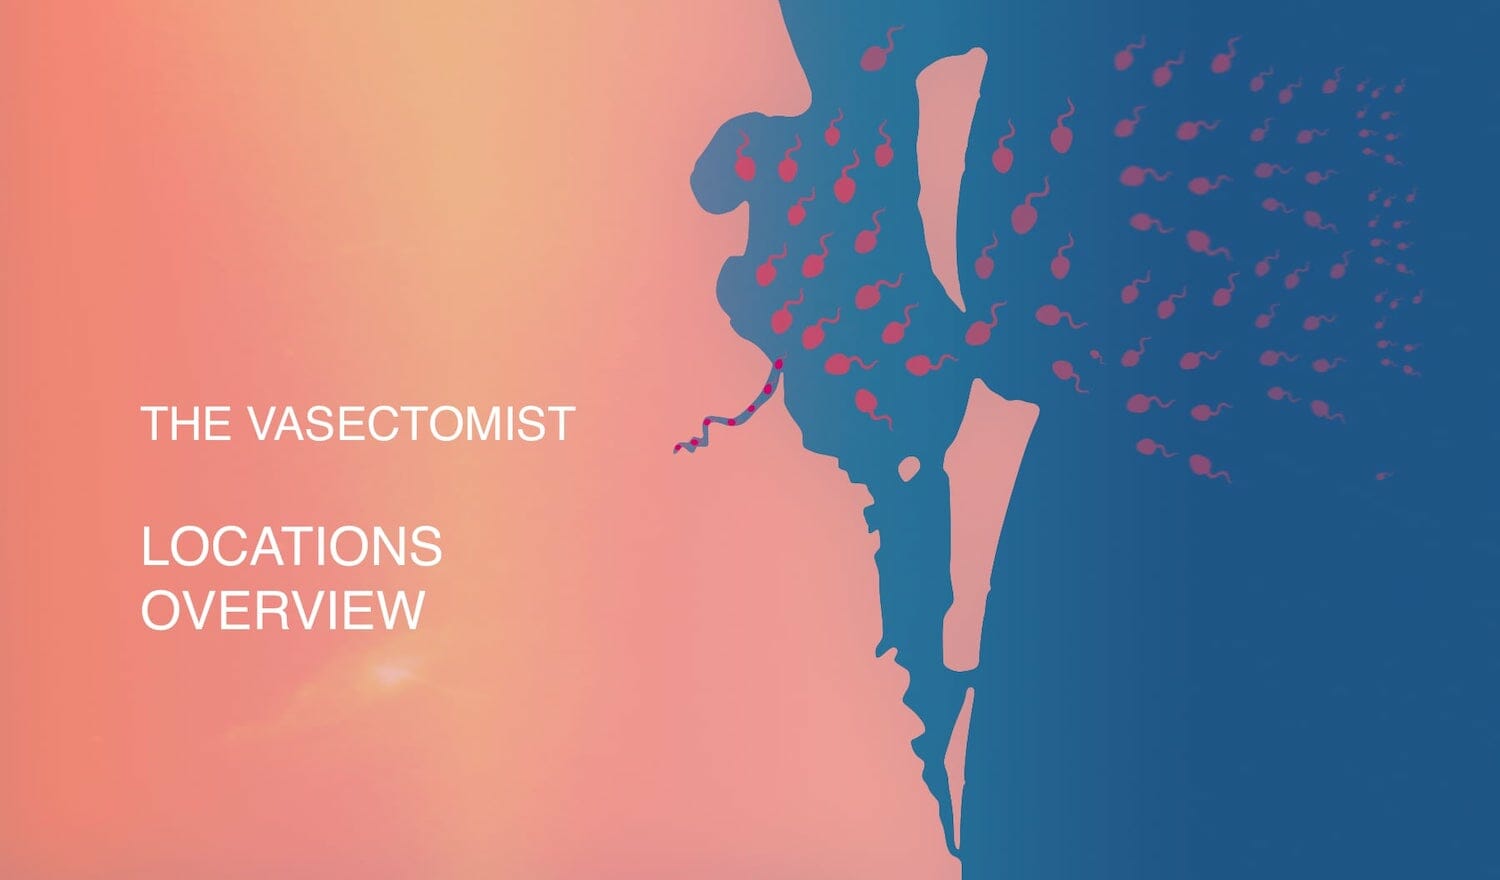 The Vasectomist locations overview on stylsed background of south east queensland - desktop